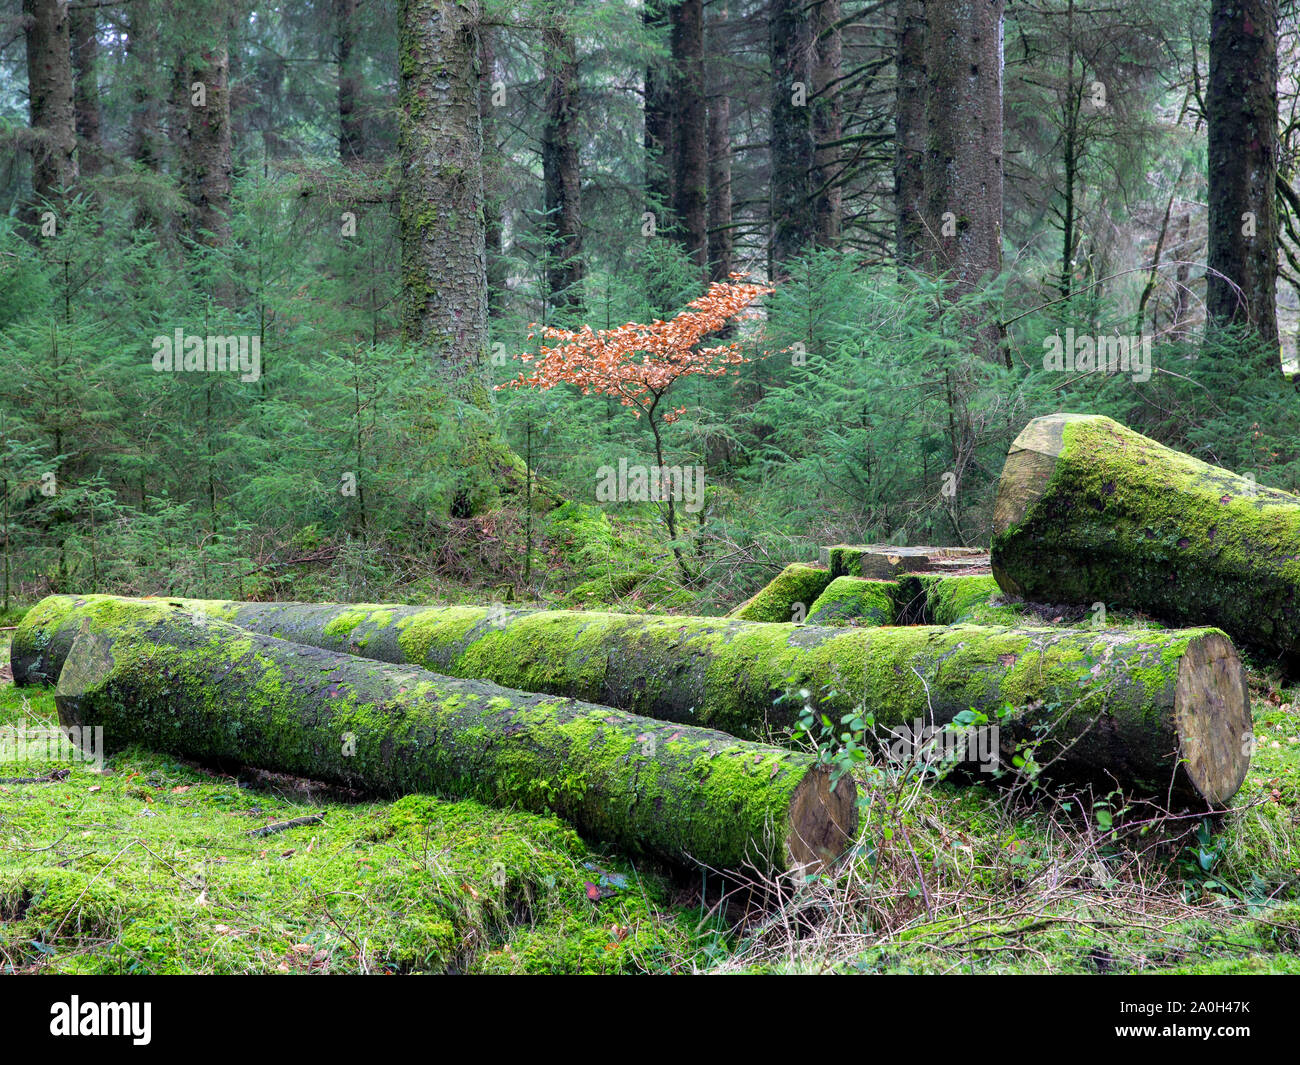 Single lone beach tree in a mossy woodland surrounded by green fur trees and felled trees Stock Photo